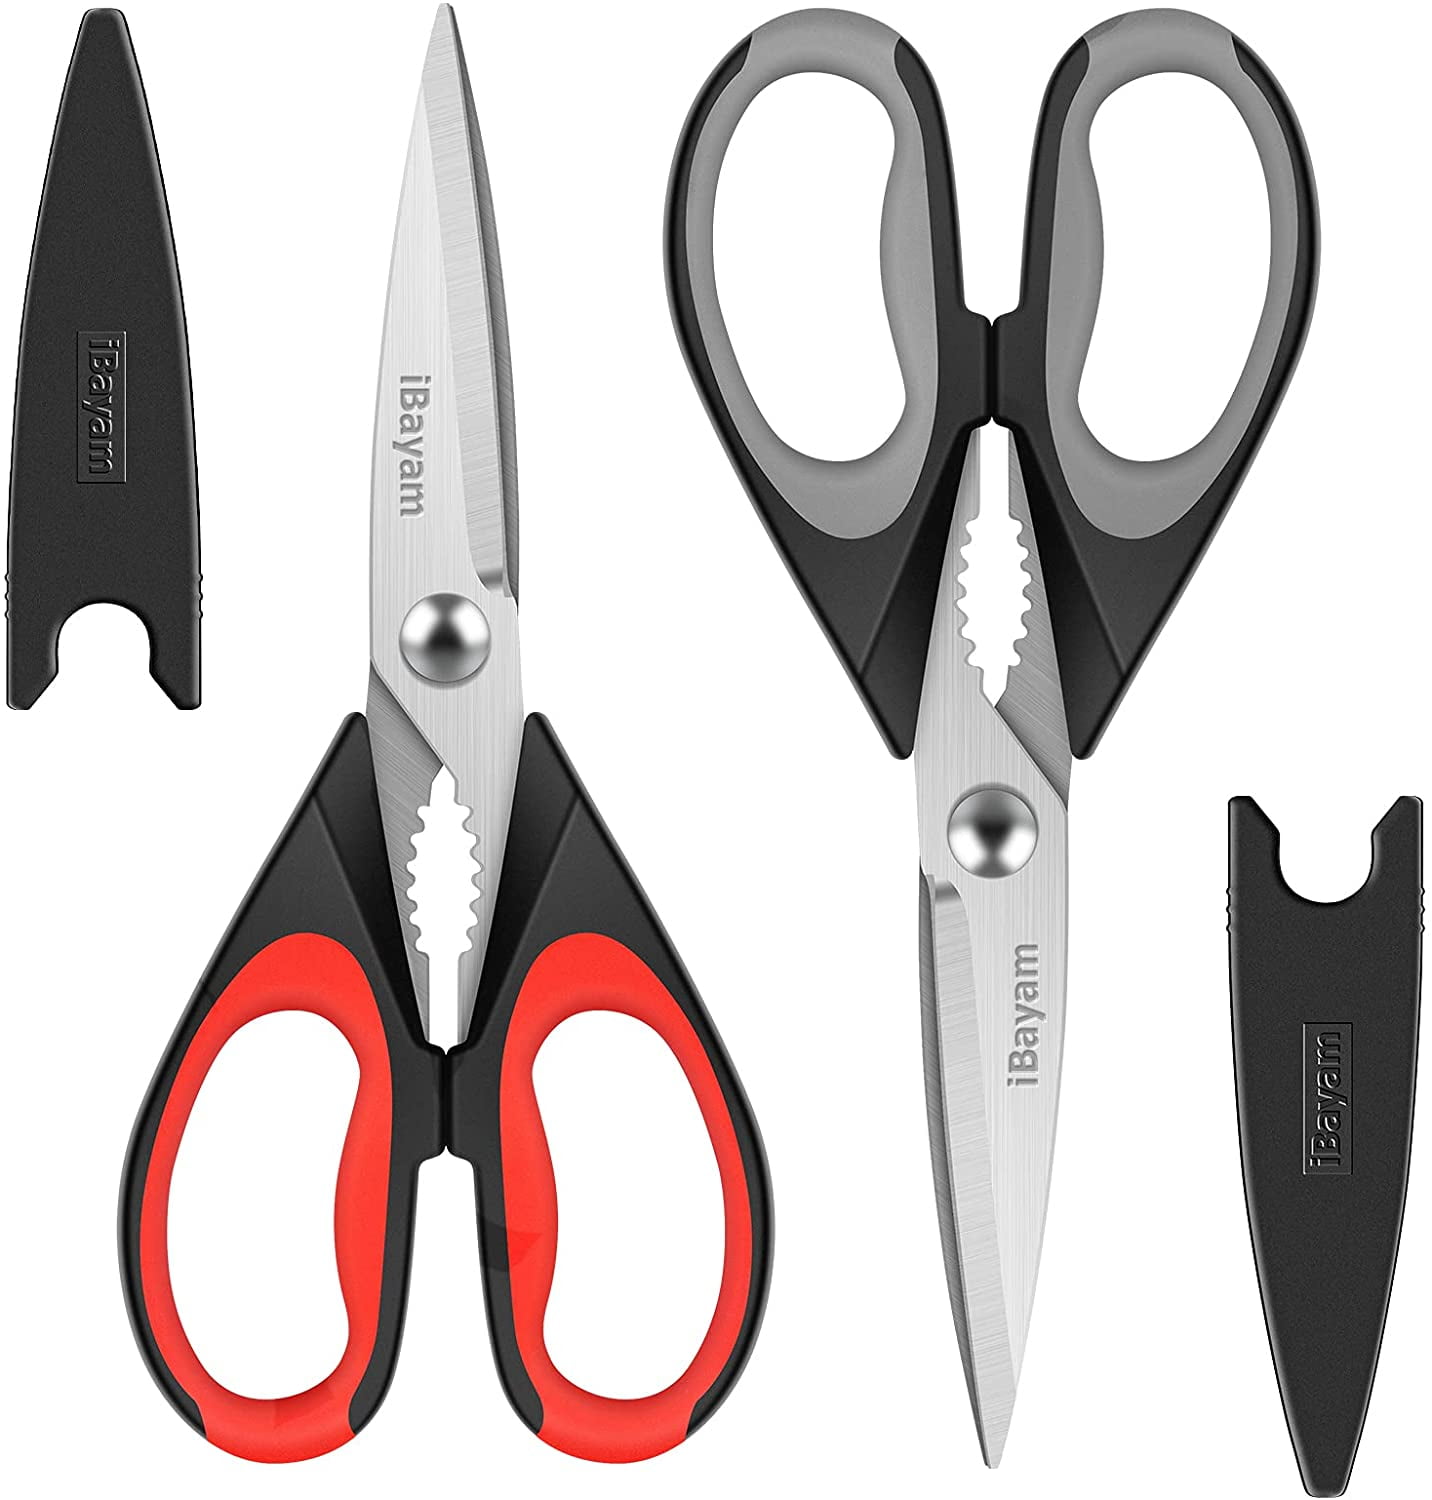 7in1 Multifunction Kitchen Scissors Food Cutting Stainless Steel Shears Holder 